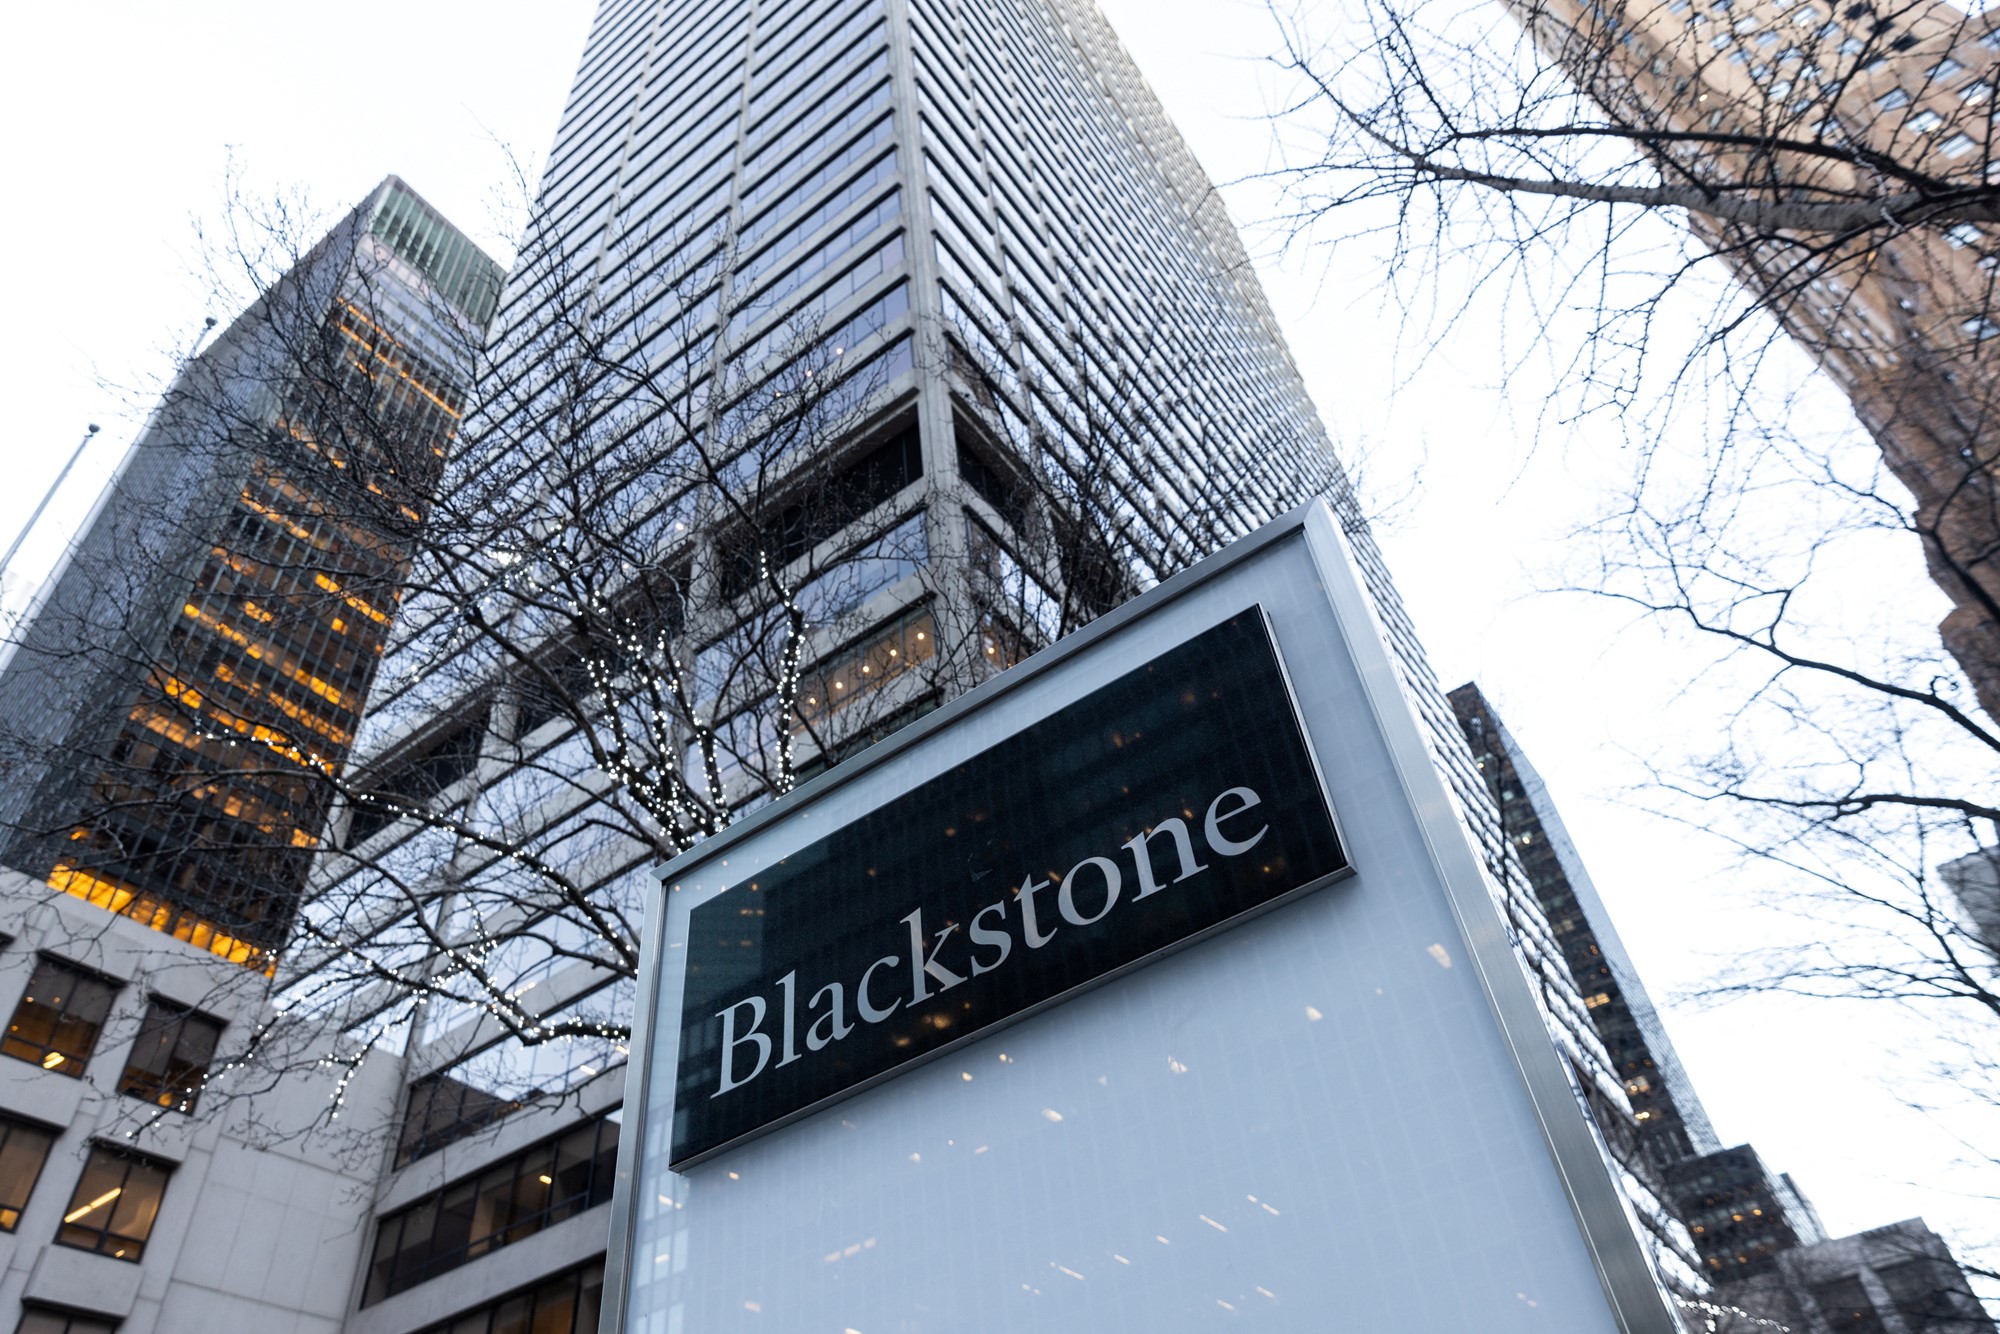 A skyscraper surrounded by other buildings with the word "Blackstone" on a sign.